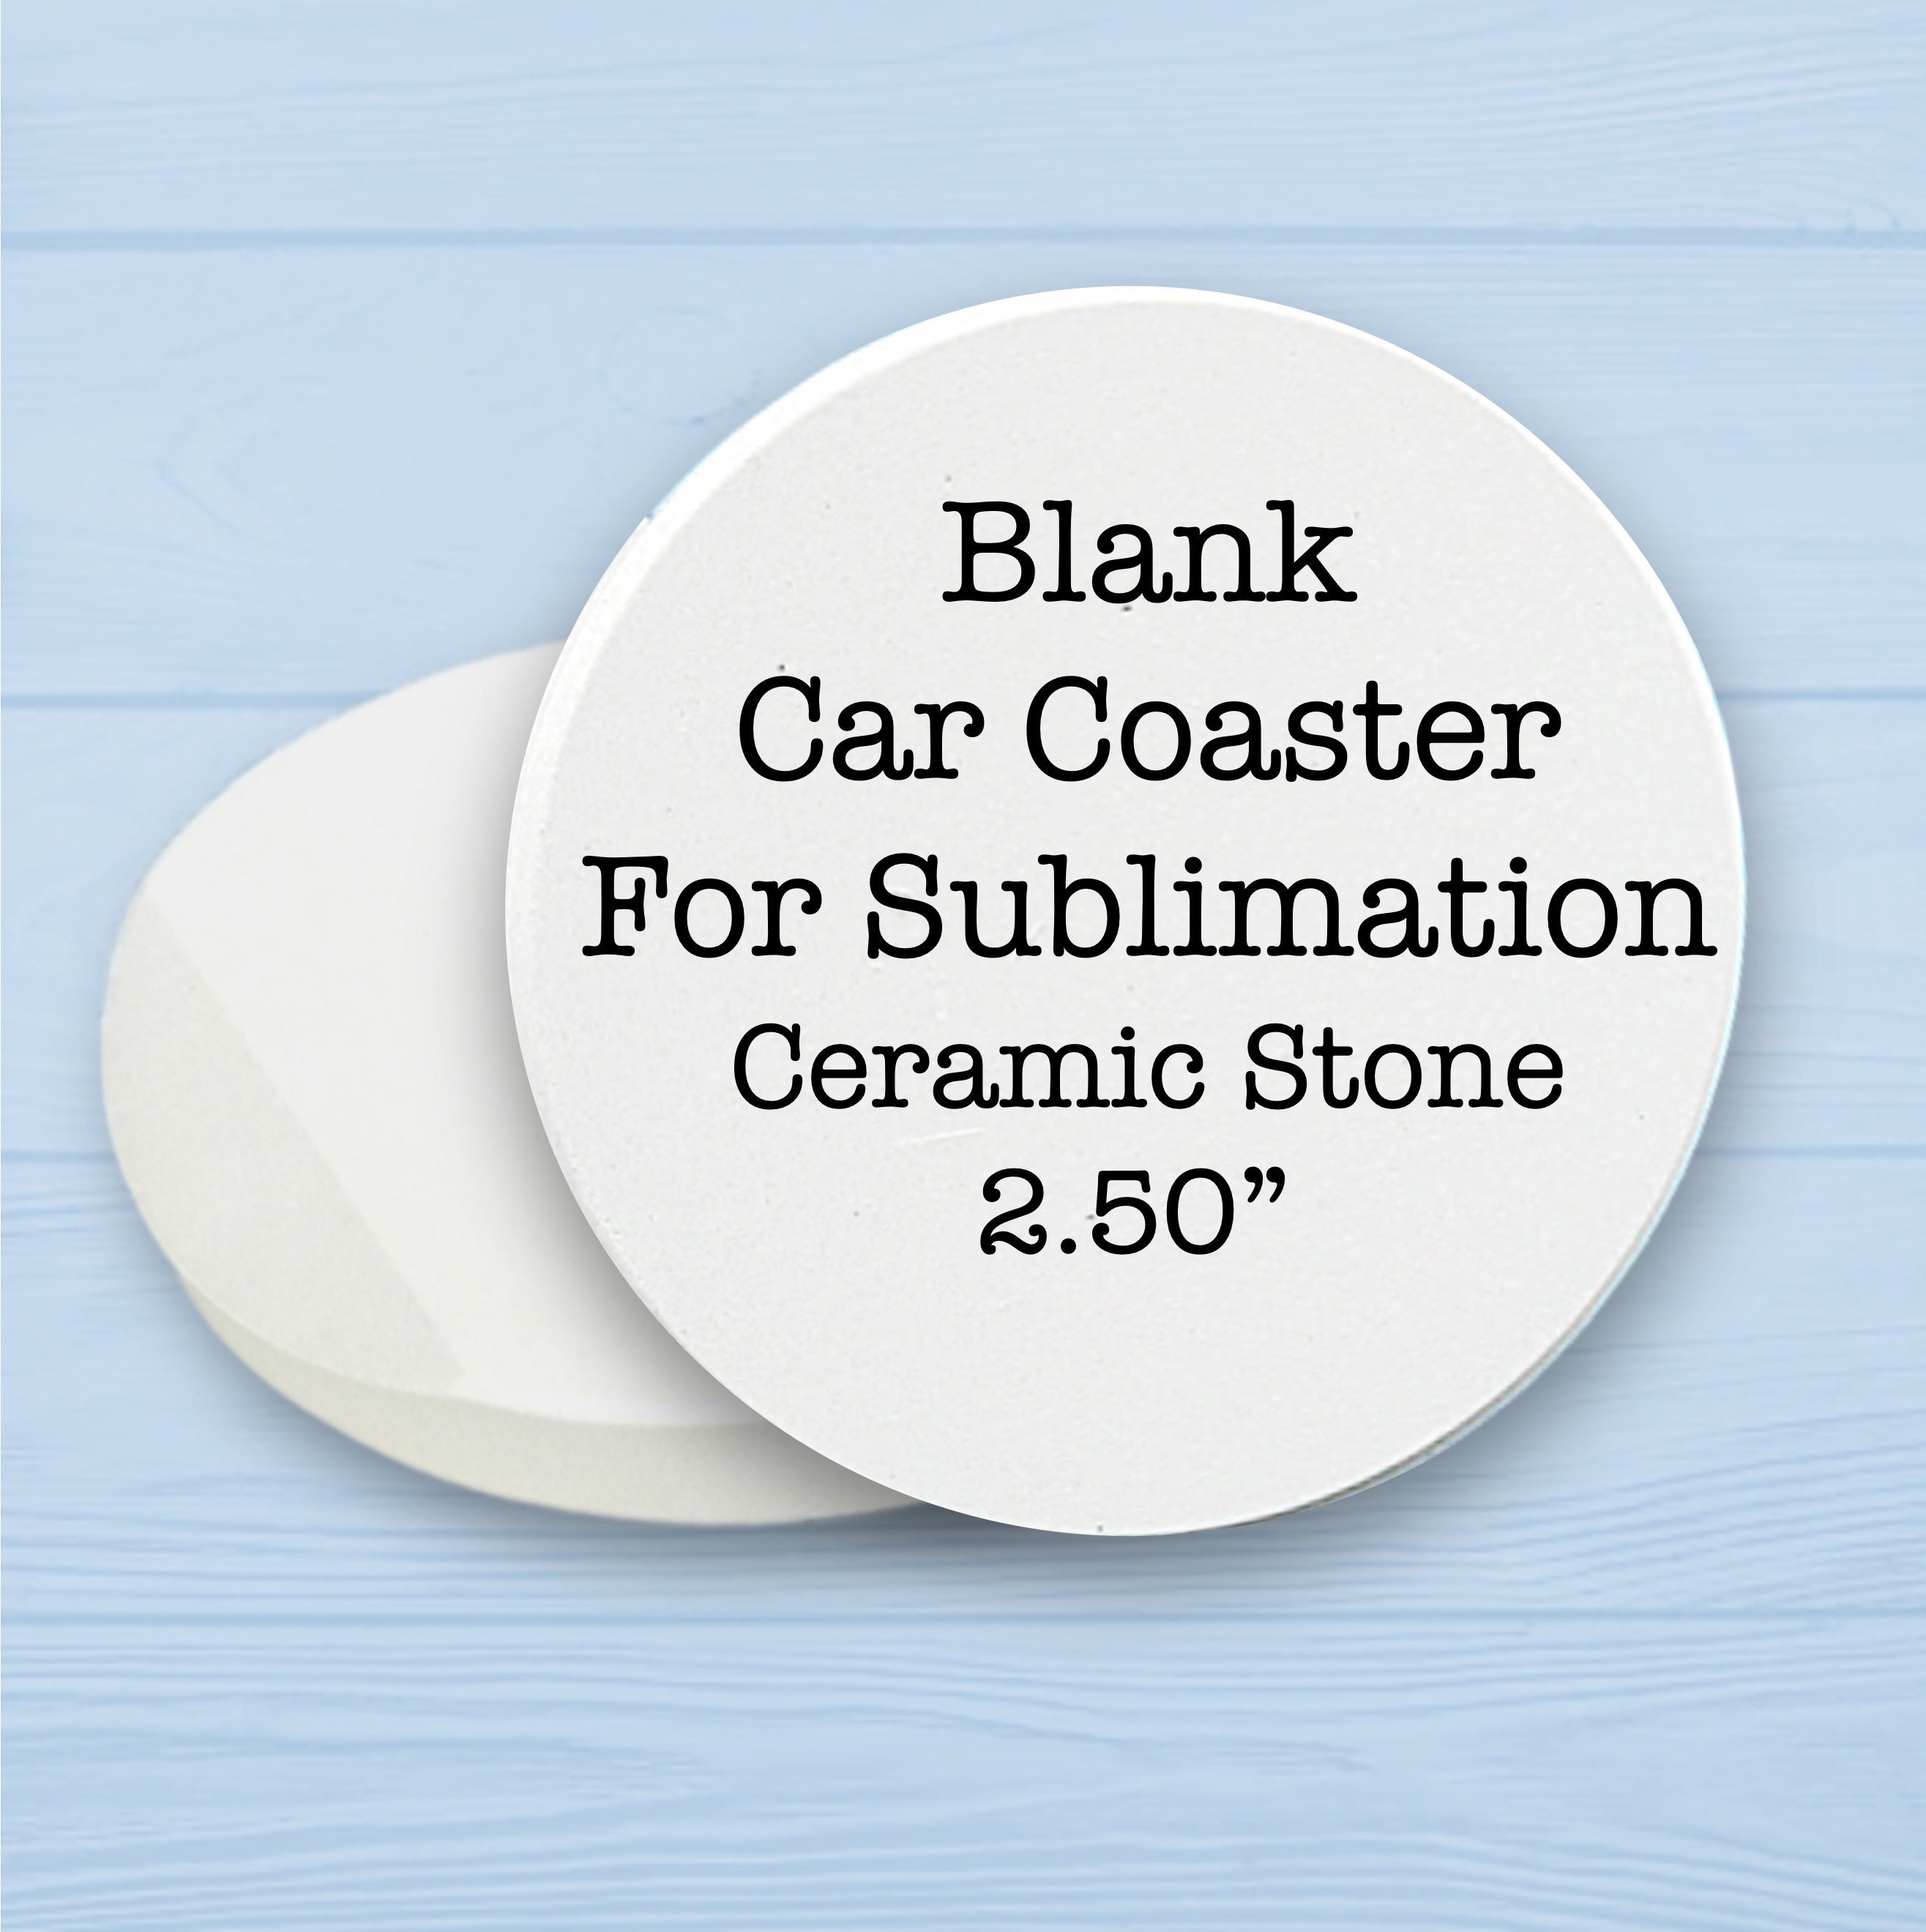  Sublimation Blanks Car Coasters, Absorbent Ceramic Sublimation  Coasters Blanks for Cup Holders Bulk, Absorb Spills to Keep Cupholders  Clean (White-Light (Ceramic for Thermal Transfer)) : Automotive